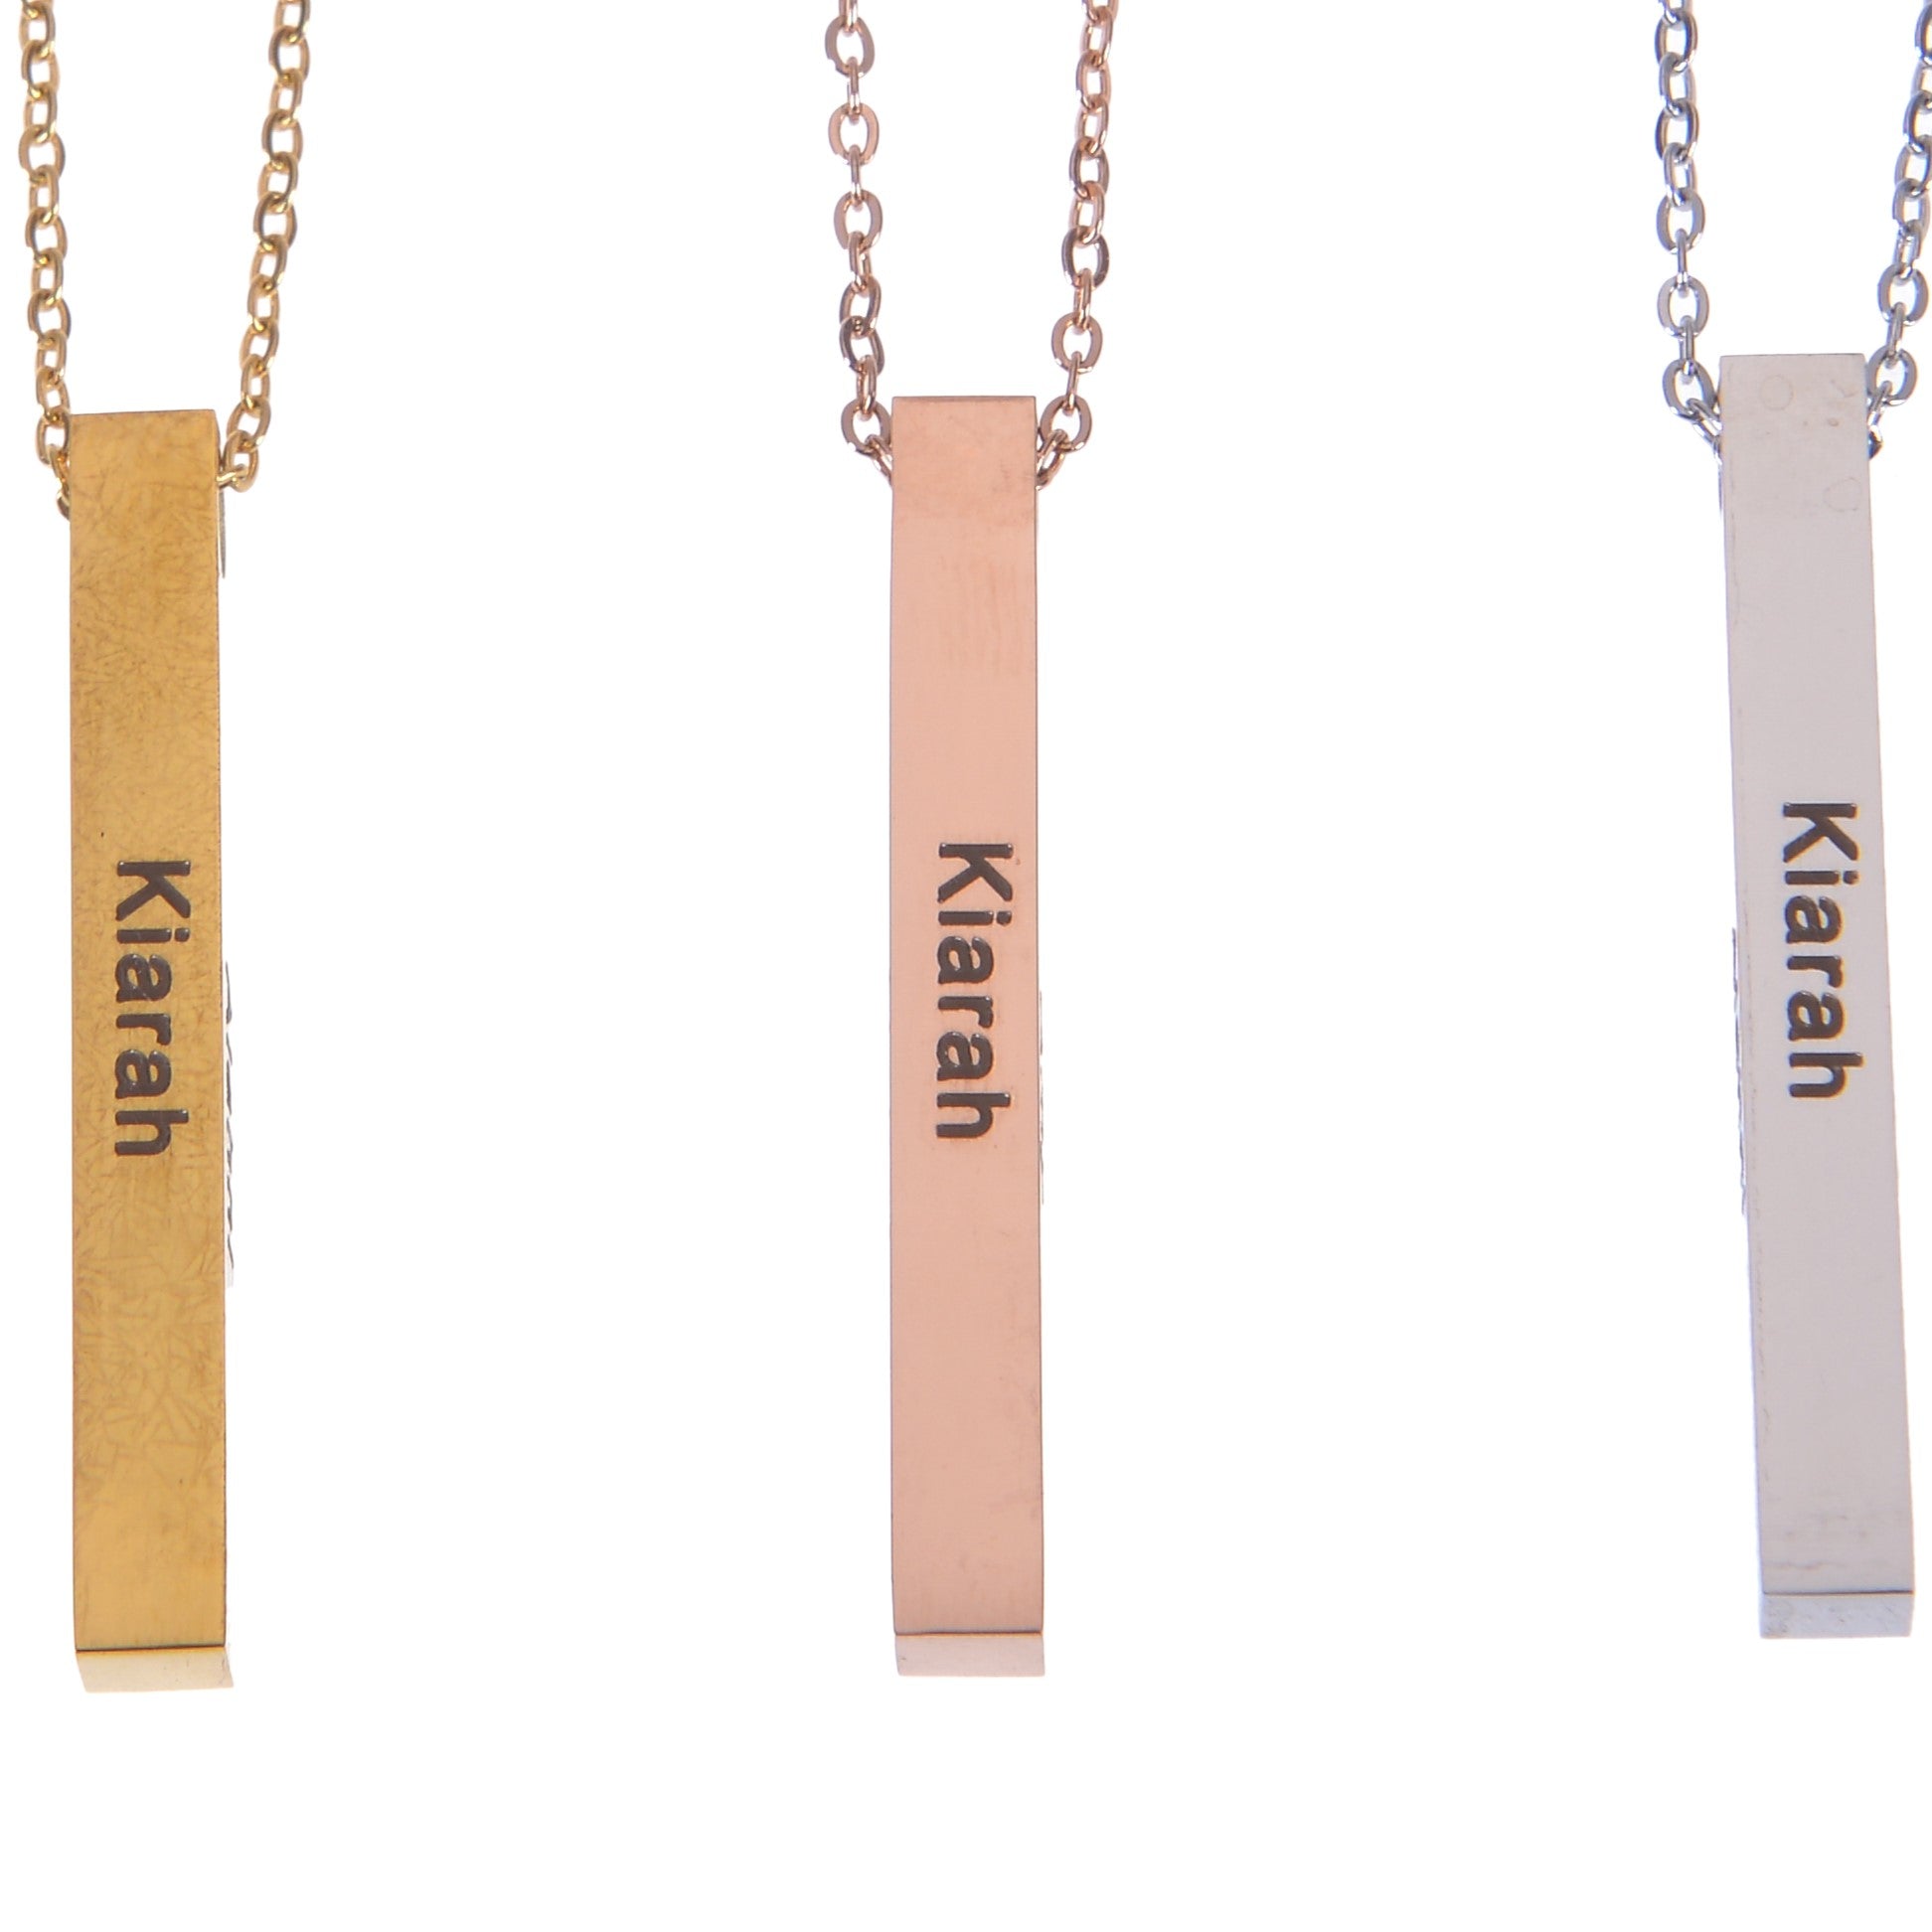 personalized bar name necklaces